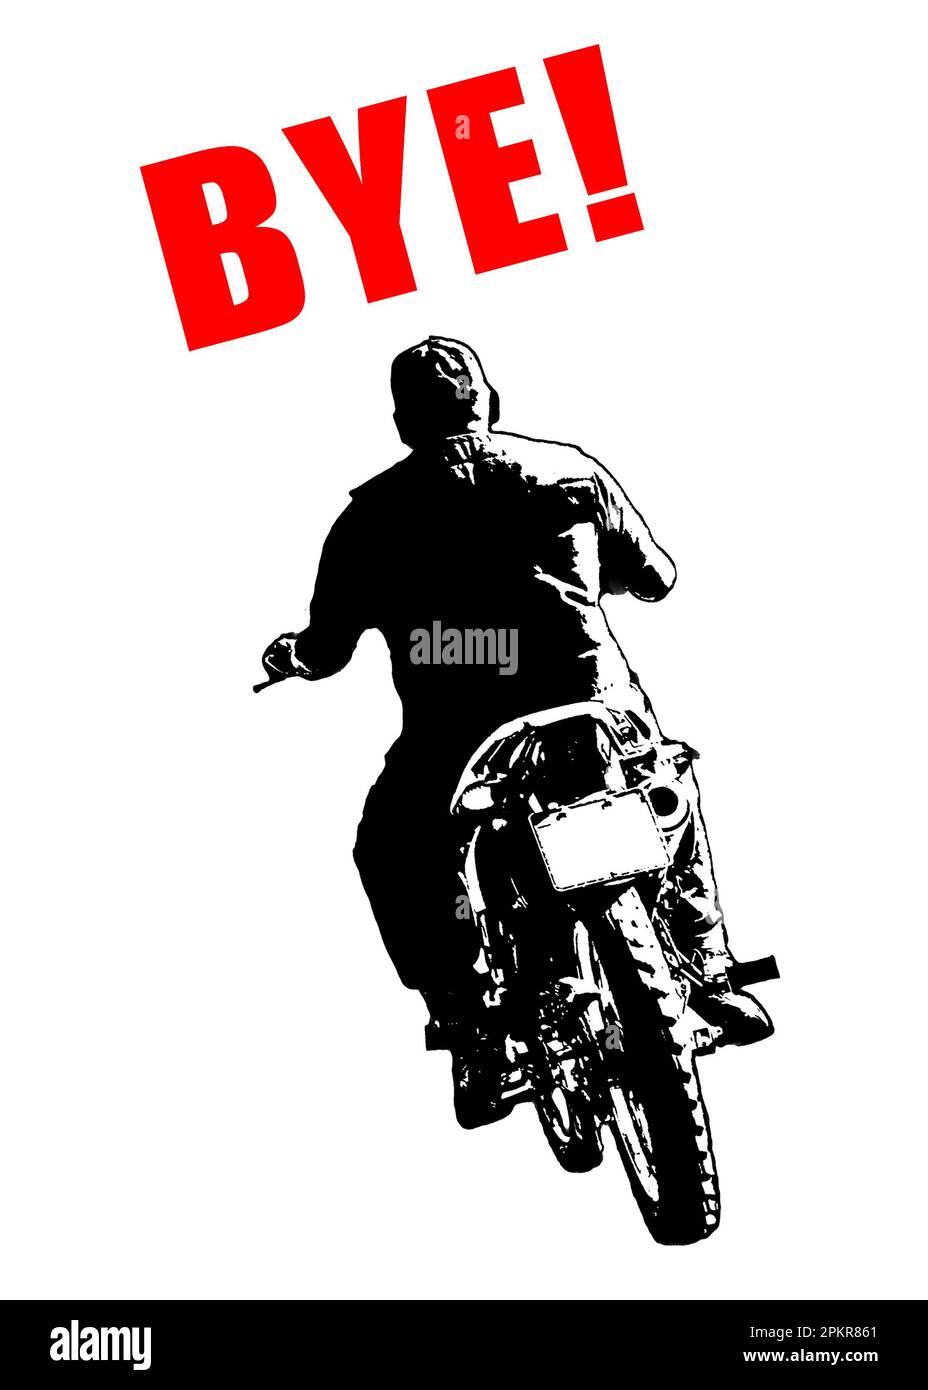 Bye sticker Cut Out Stock Images & Pictures - Alamy